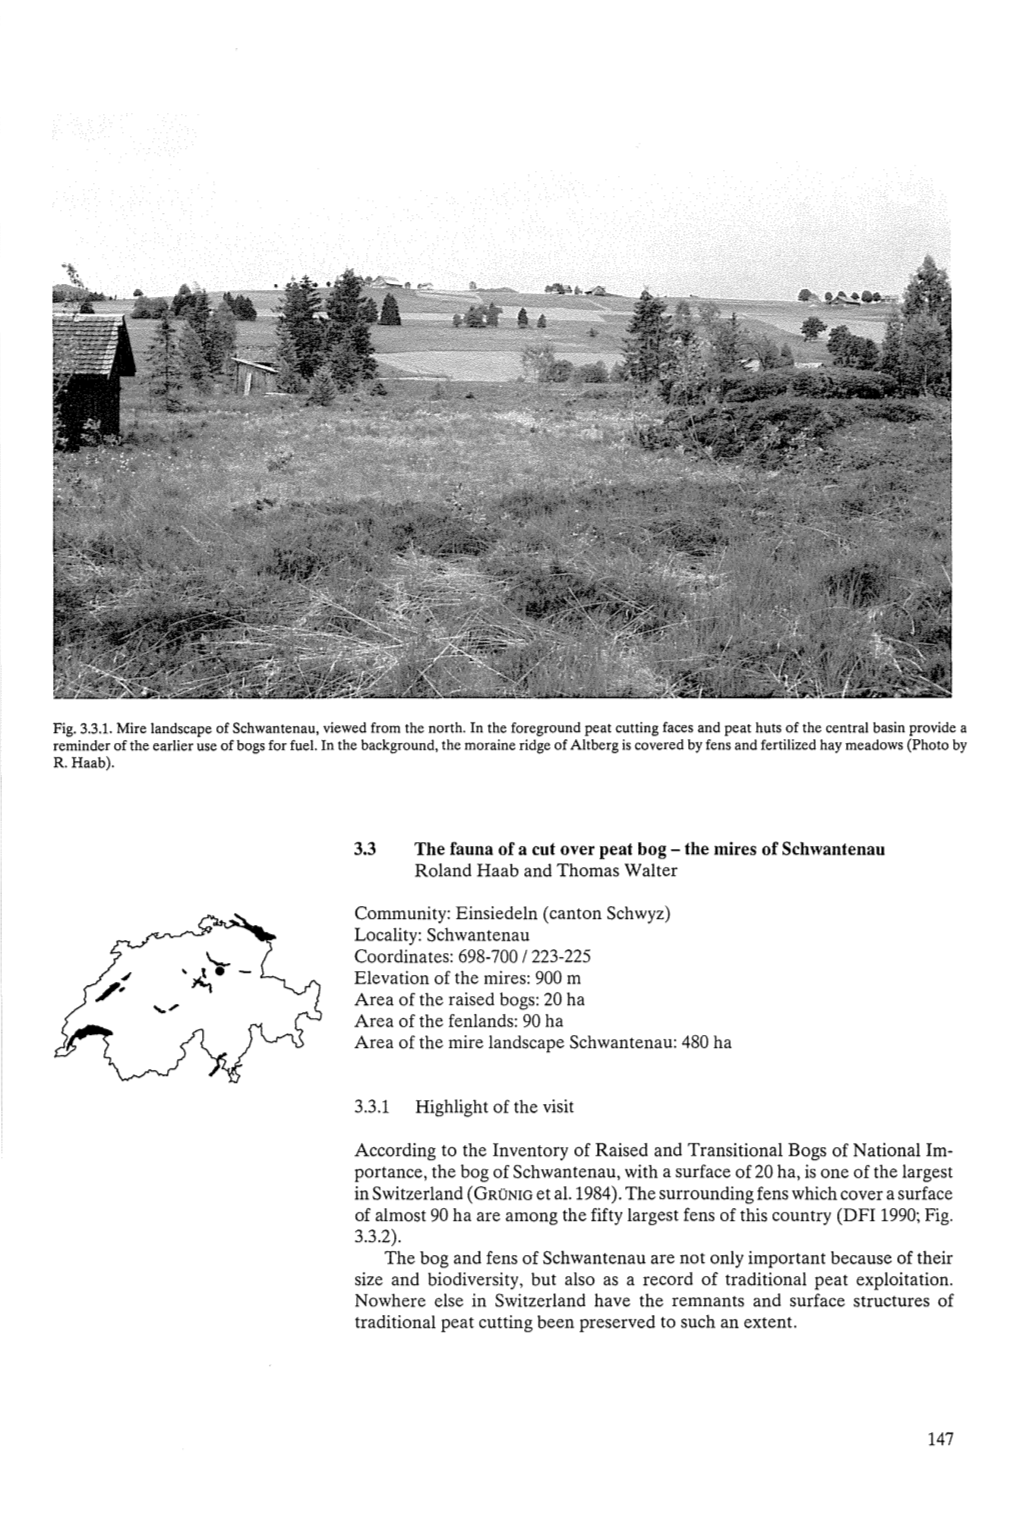 3.3 the Fauna of a Cut Over Peat Bog - the Mires of Schwantenau Roland Haab and Thomas Waiter